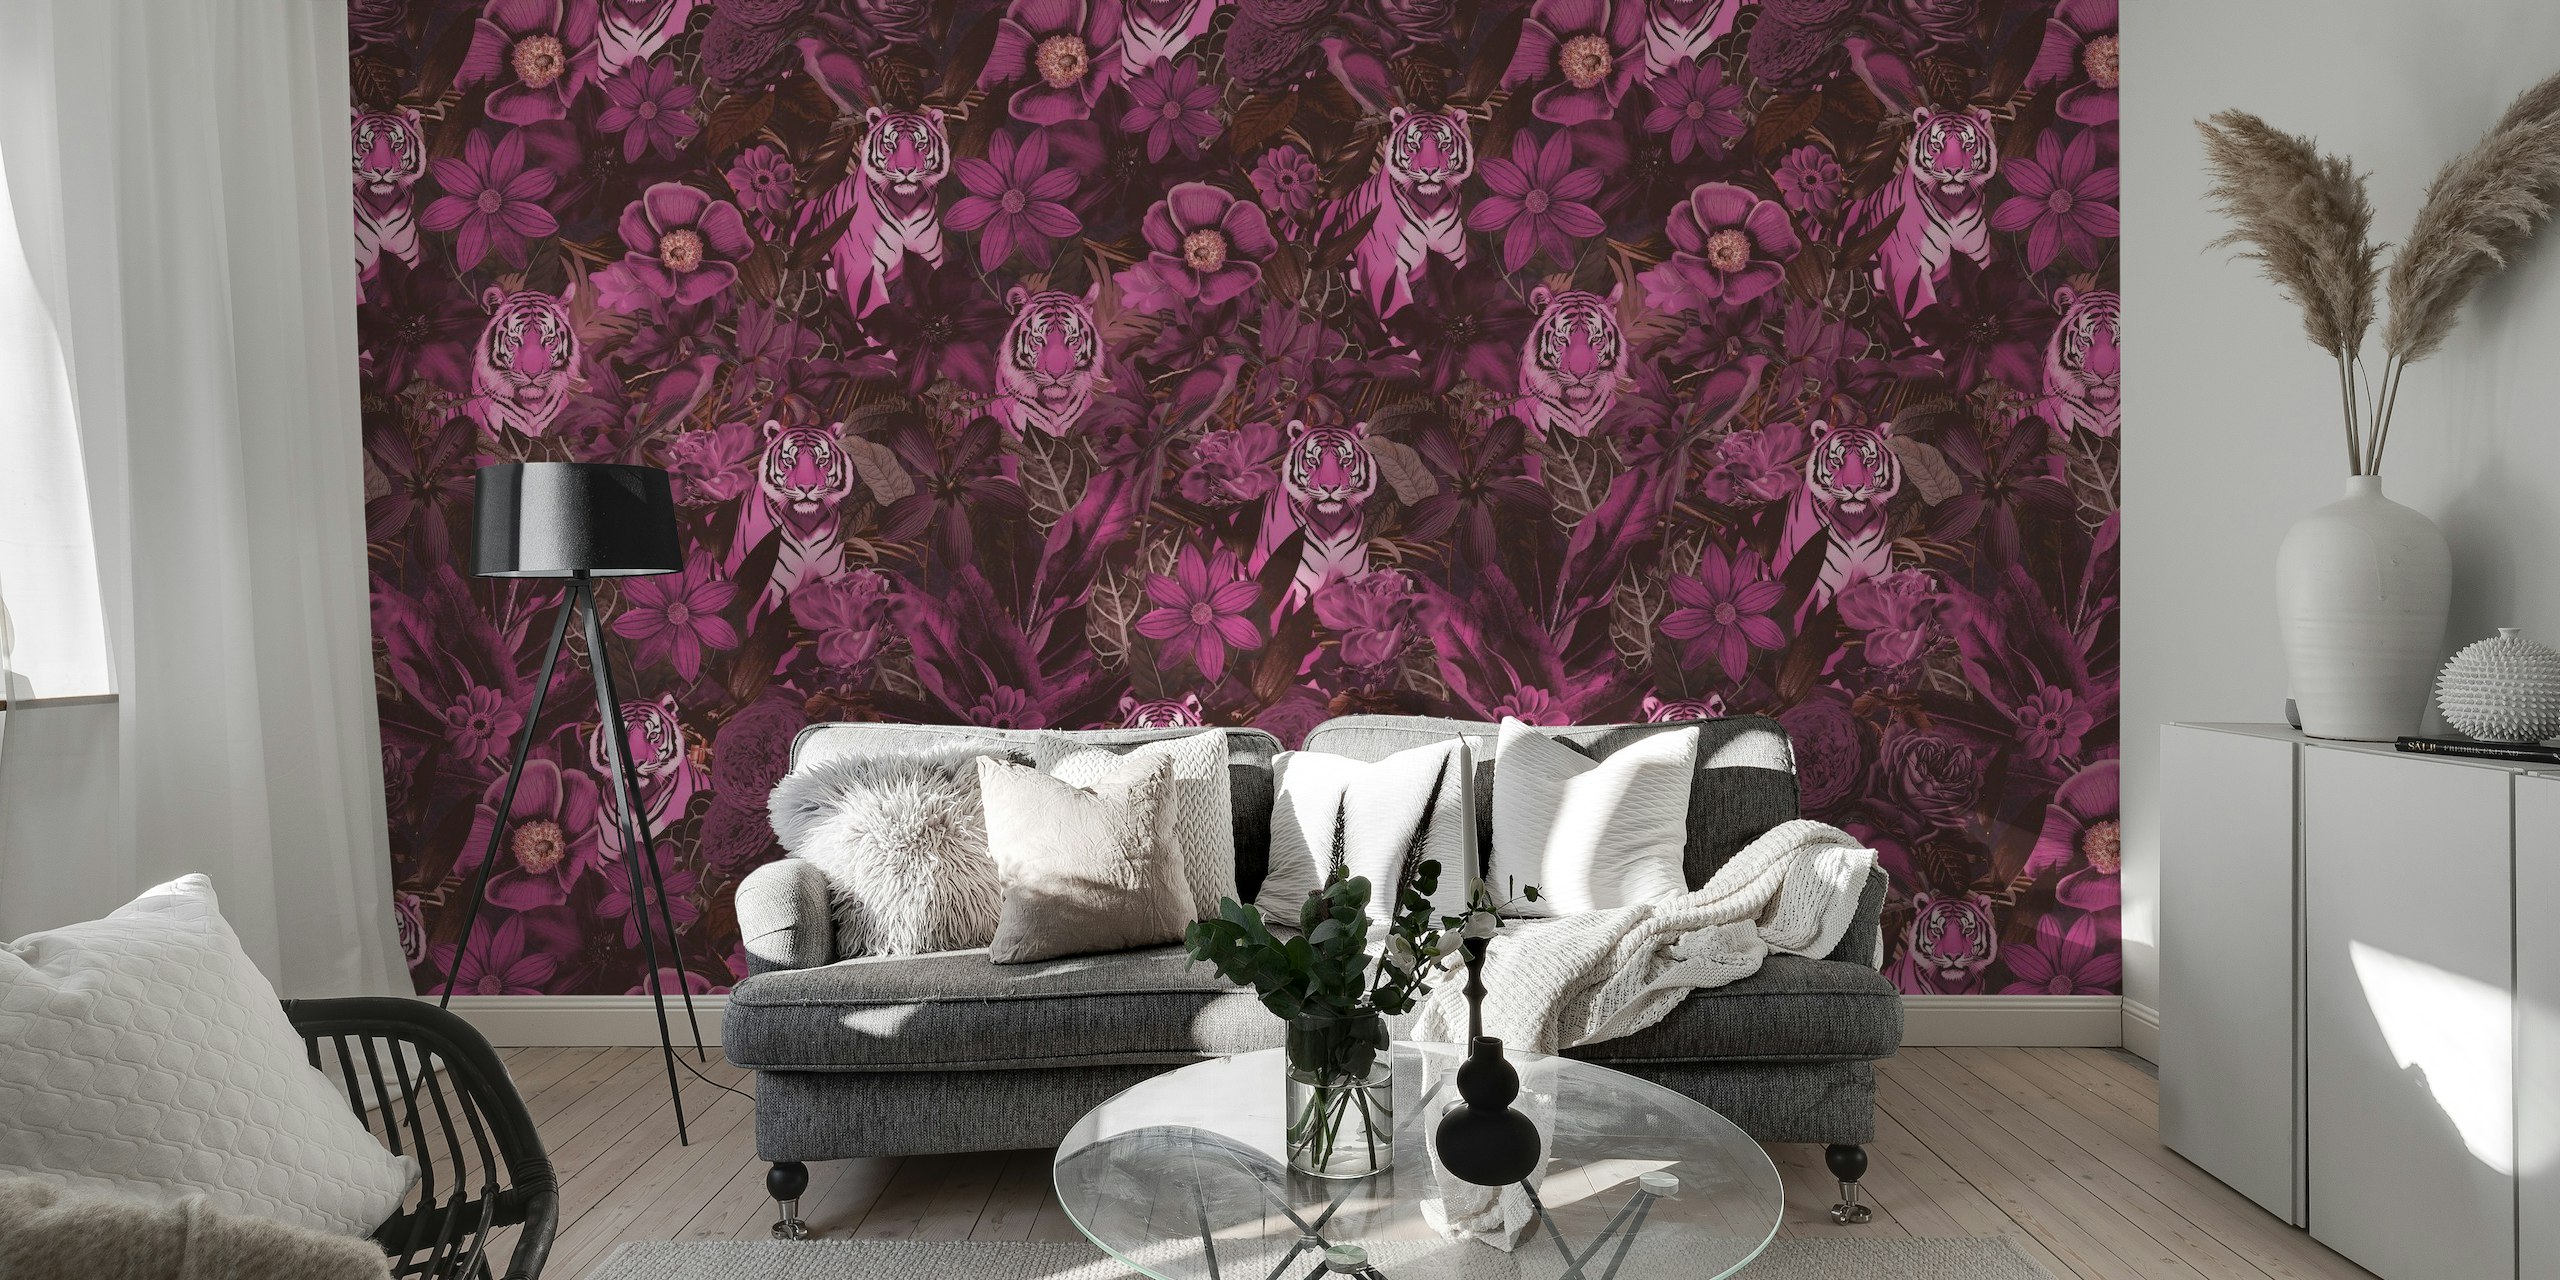 Fancy Jungle Opulence With Tigers wallpaper